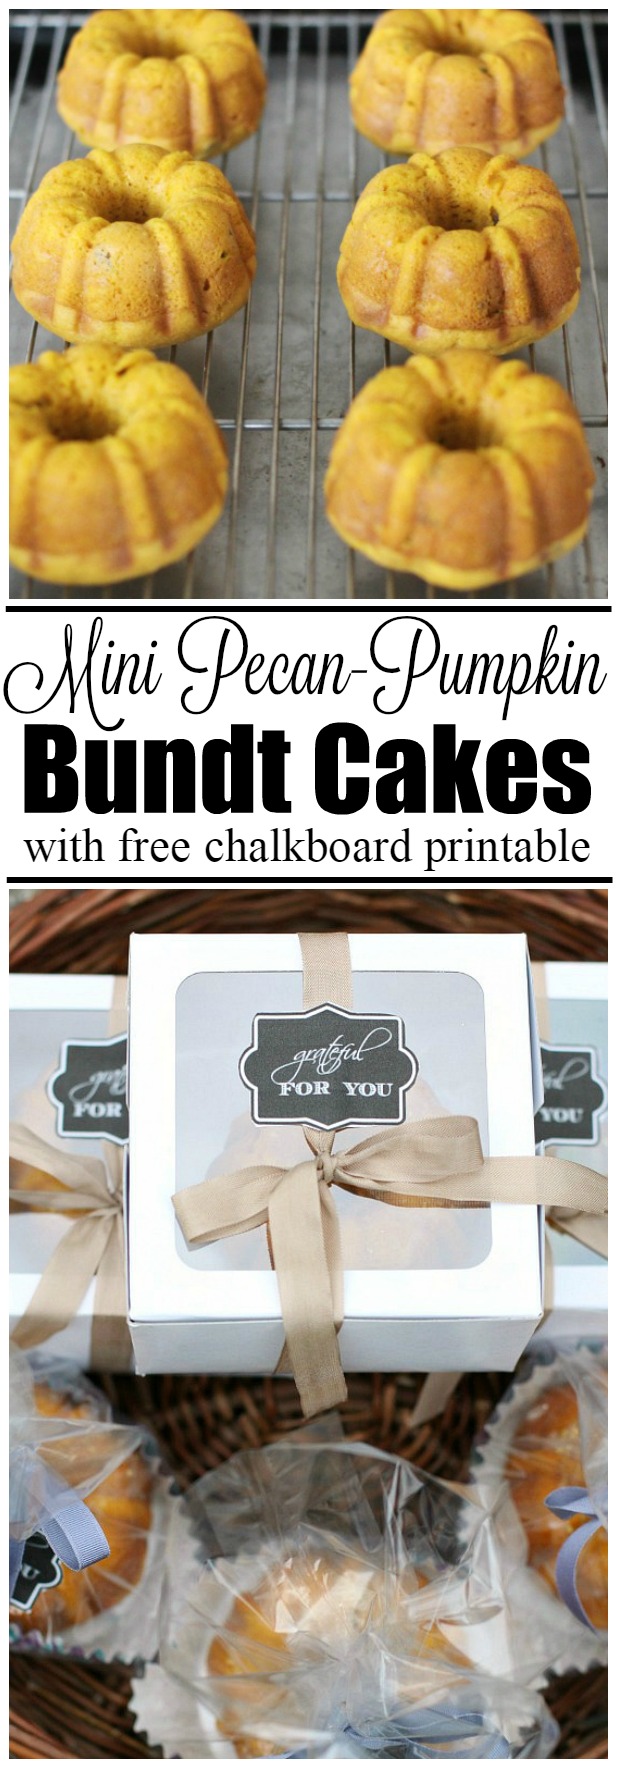 Free chalkboard gift tag and delicious recipe for mini pecan-pumpkin bundt cakes. These make cute fall hostess gifts or Thanksgiving favors!